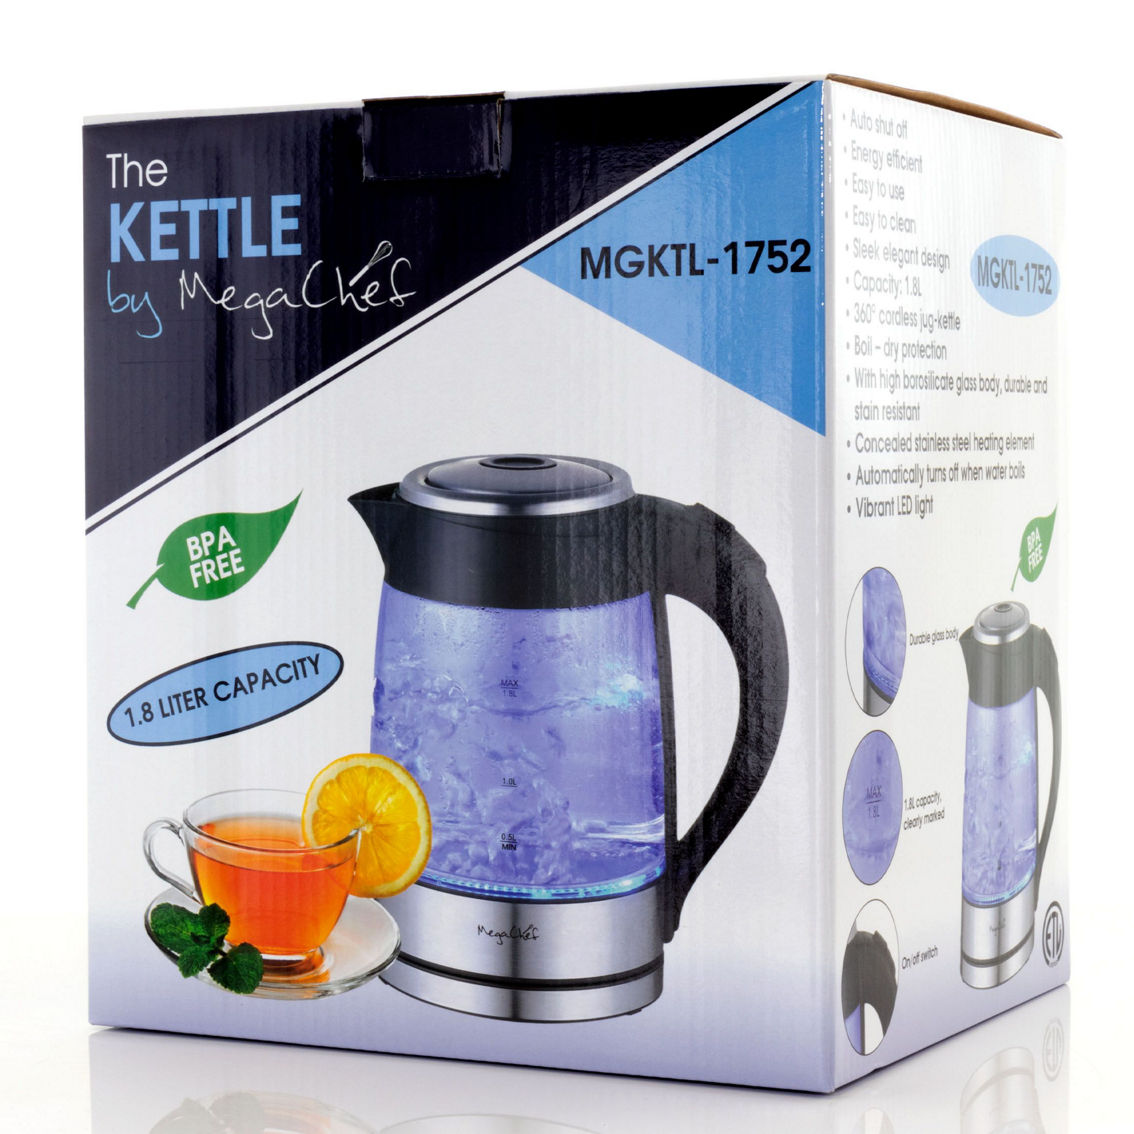 MegaChef 1.8Lt. Glass Body and Stainless Steel Electric Tea Kettle - Image 4 of 5